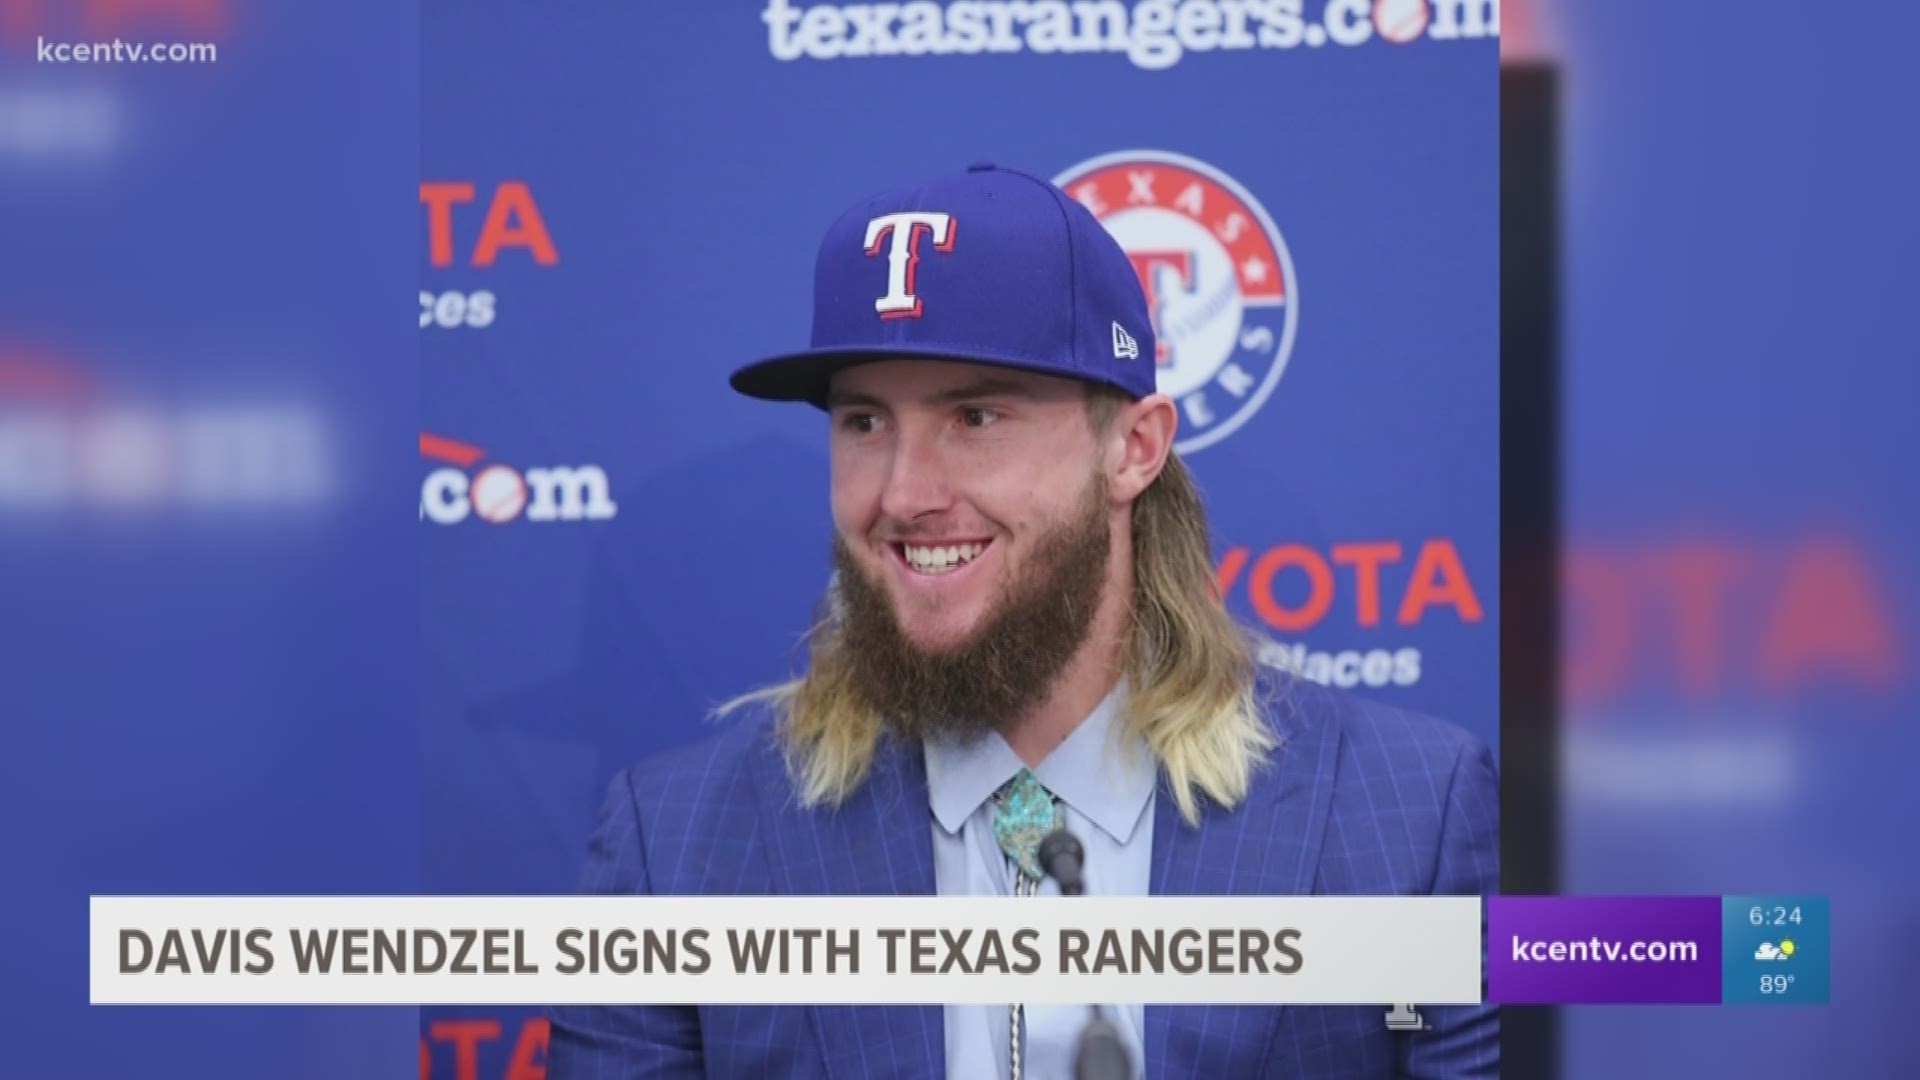 The former Baylor Bear signed with the Texas Rangers for $1.6 million, $210,000 under his drafted slot.